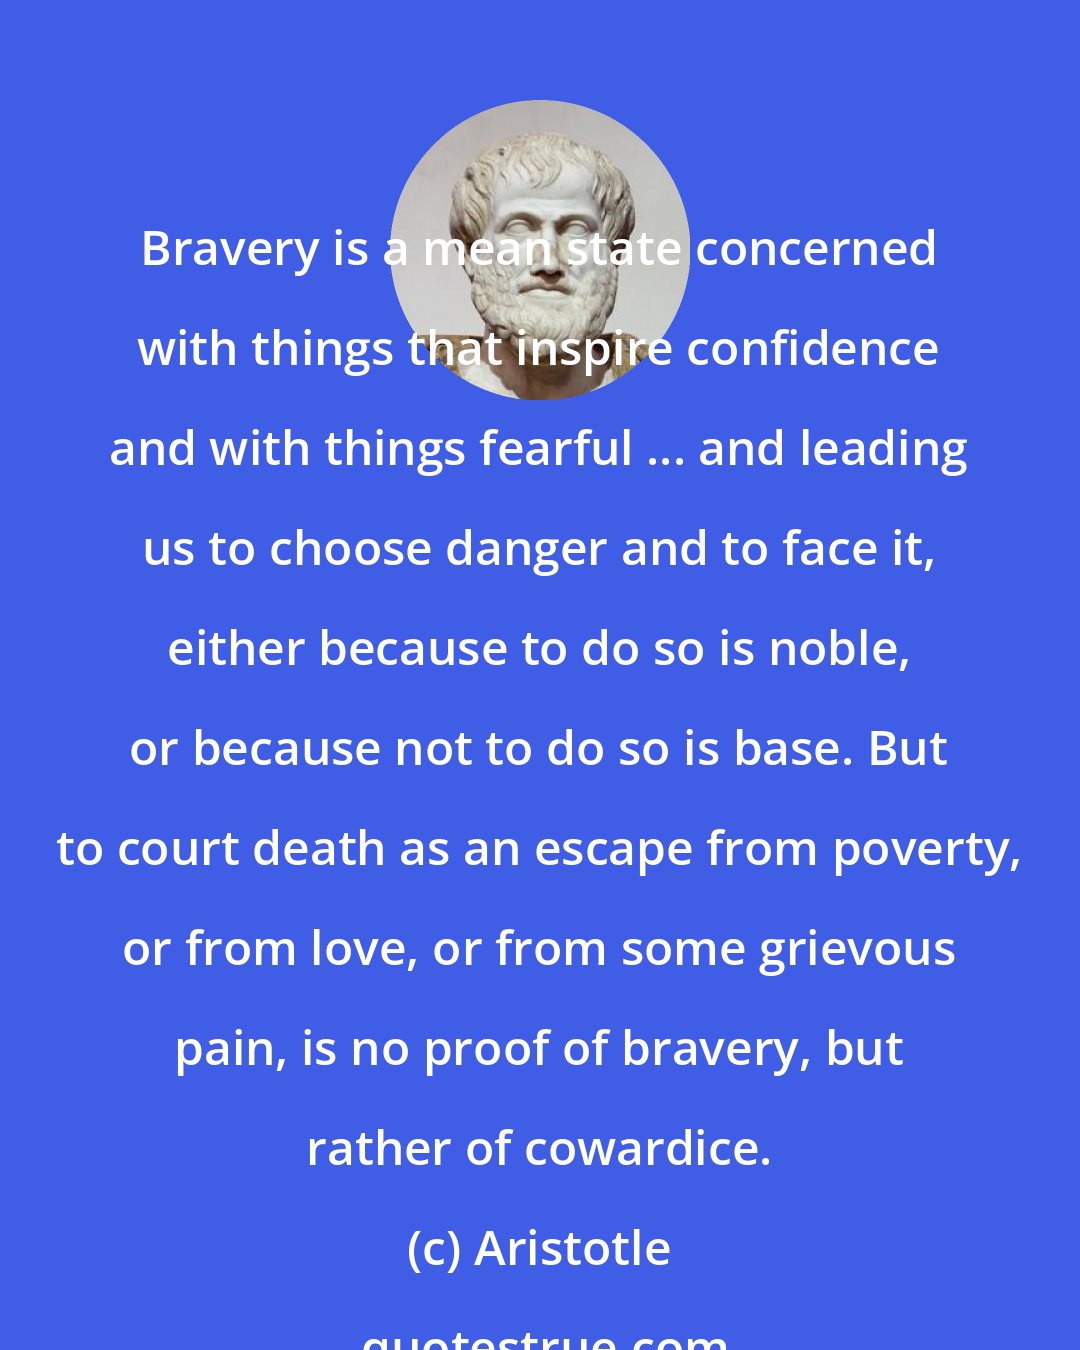 Aristotle: Bravery is a mean state concerned with things that inspire confidence and with things fearful ... and leading us to choose danger and to face it, either because to do so is noble, or because not to do so is base. But to court death as an escape from poverty, or from love, or from some grievous pain, is no proof of bravery, but rather of cowardice.